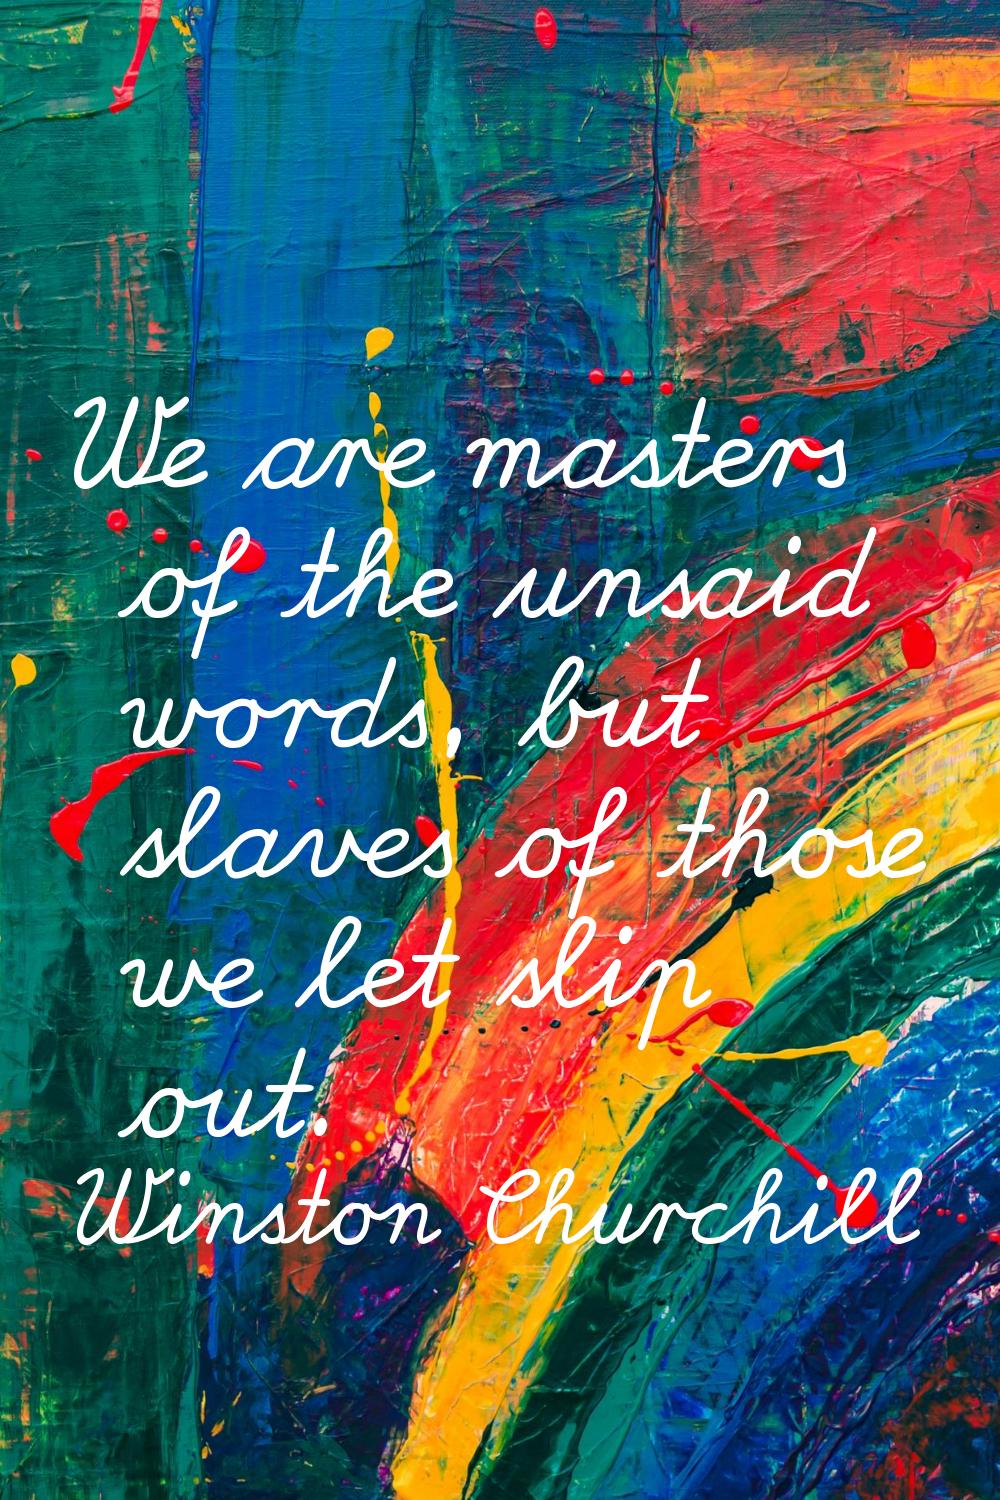 We are masters of the unsaid words, but slaves of those we let slip out.